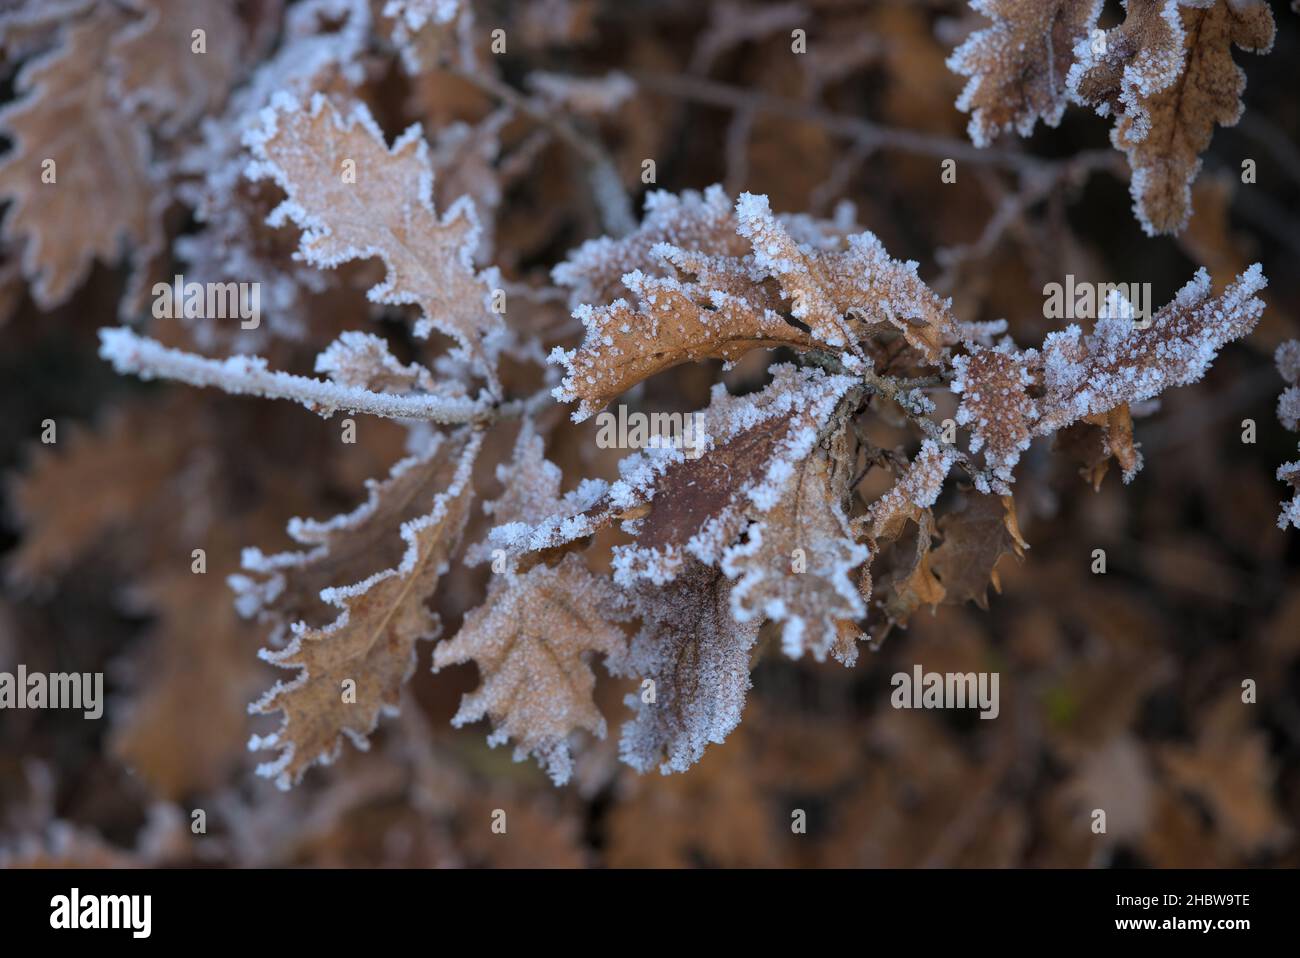 tall grass and frosted leaves in winter with cold, close-up detail Stock Photo